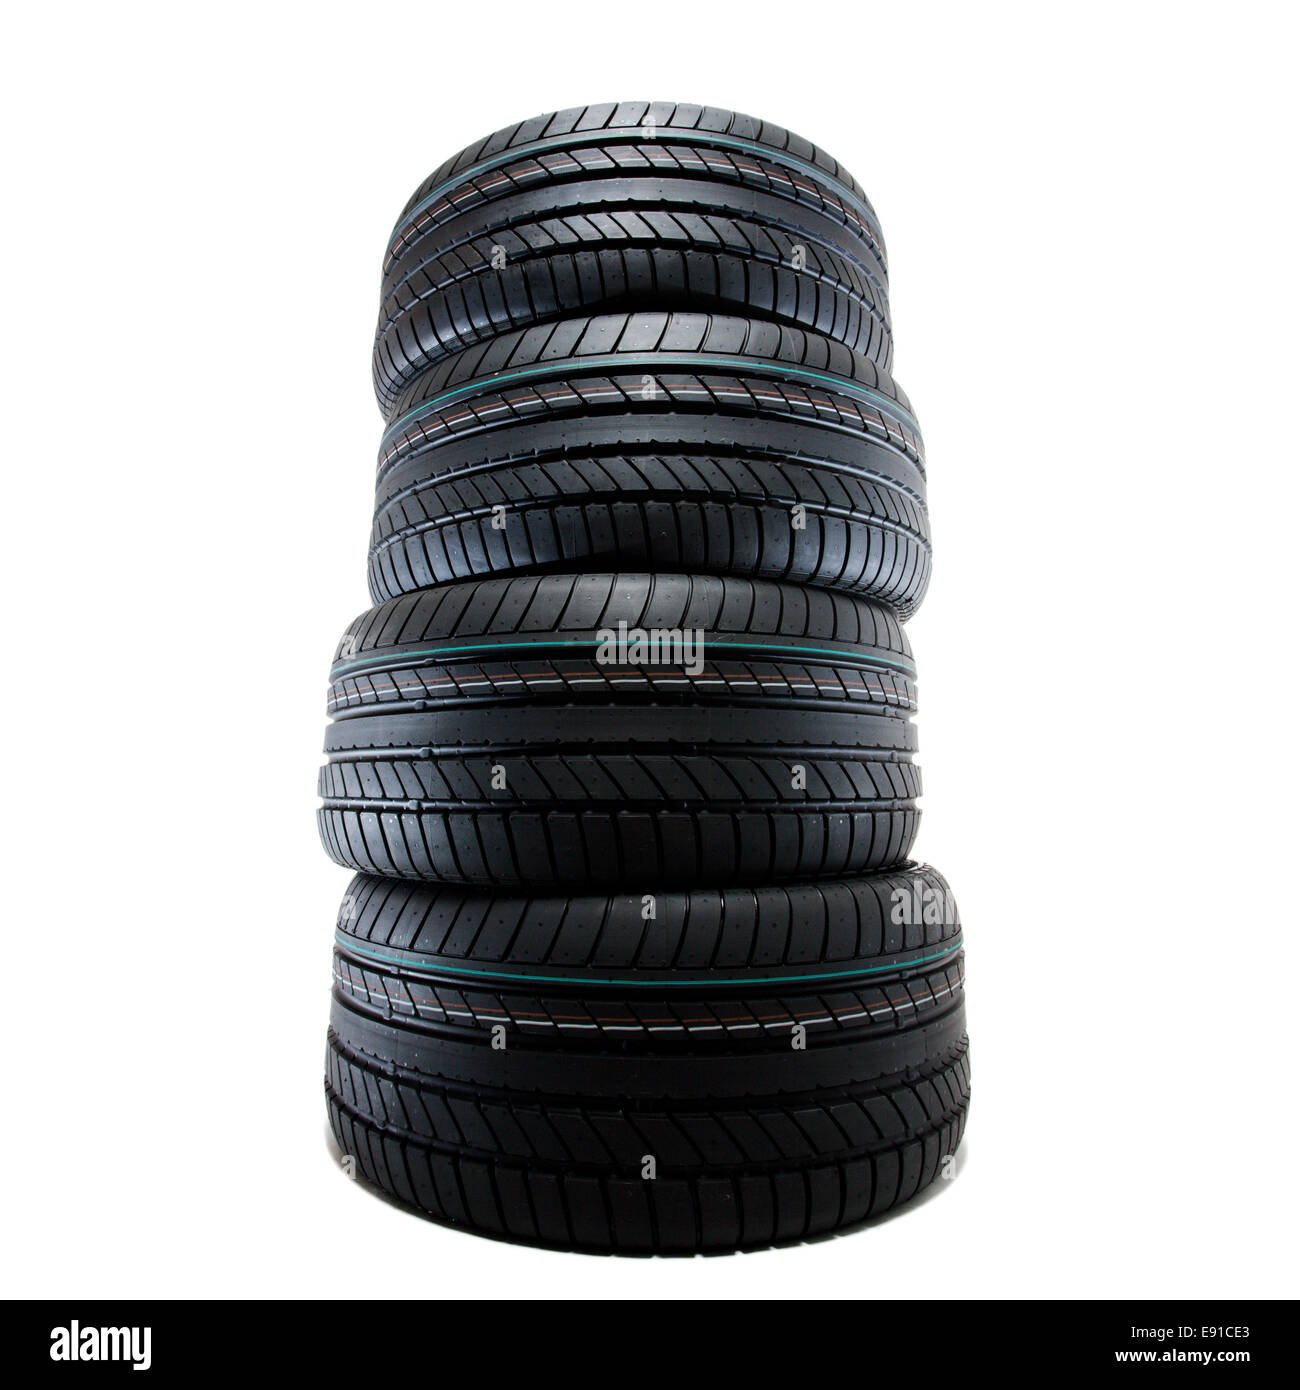 new sport summer tires stacked Stock Photo